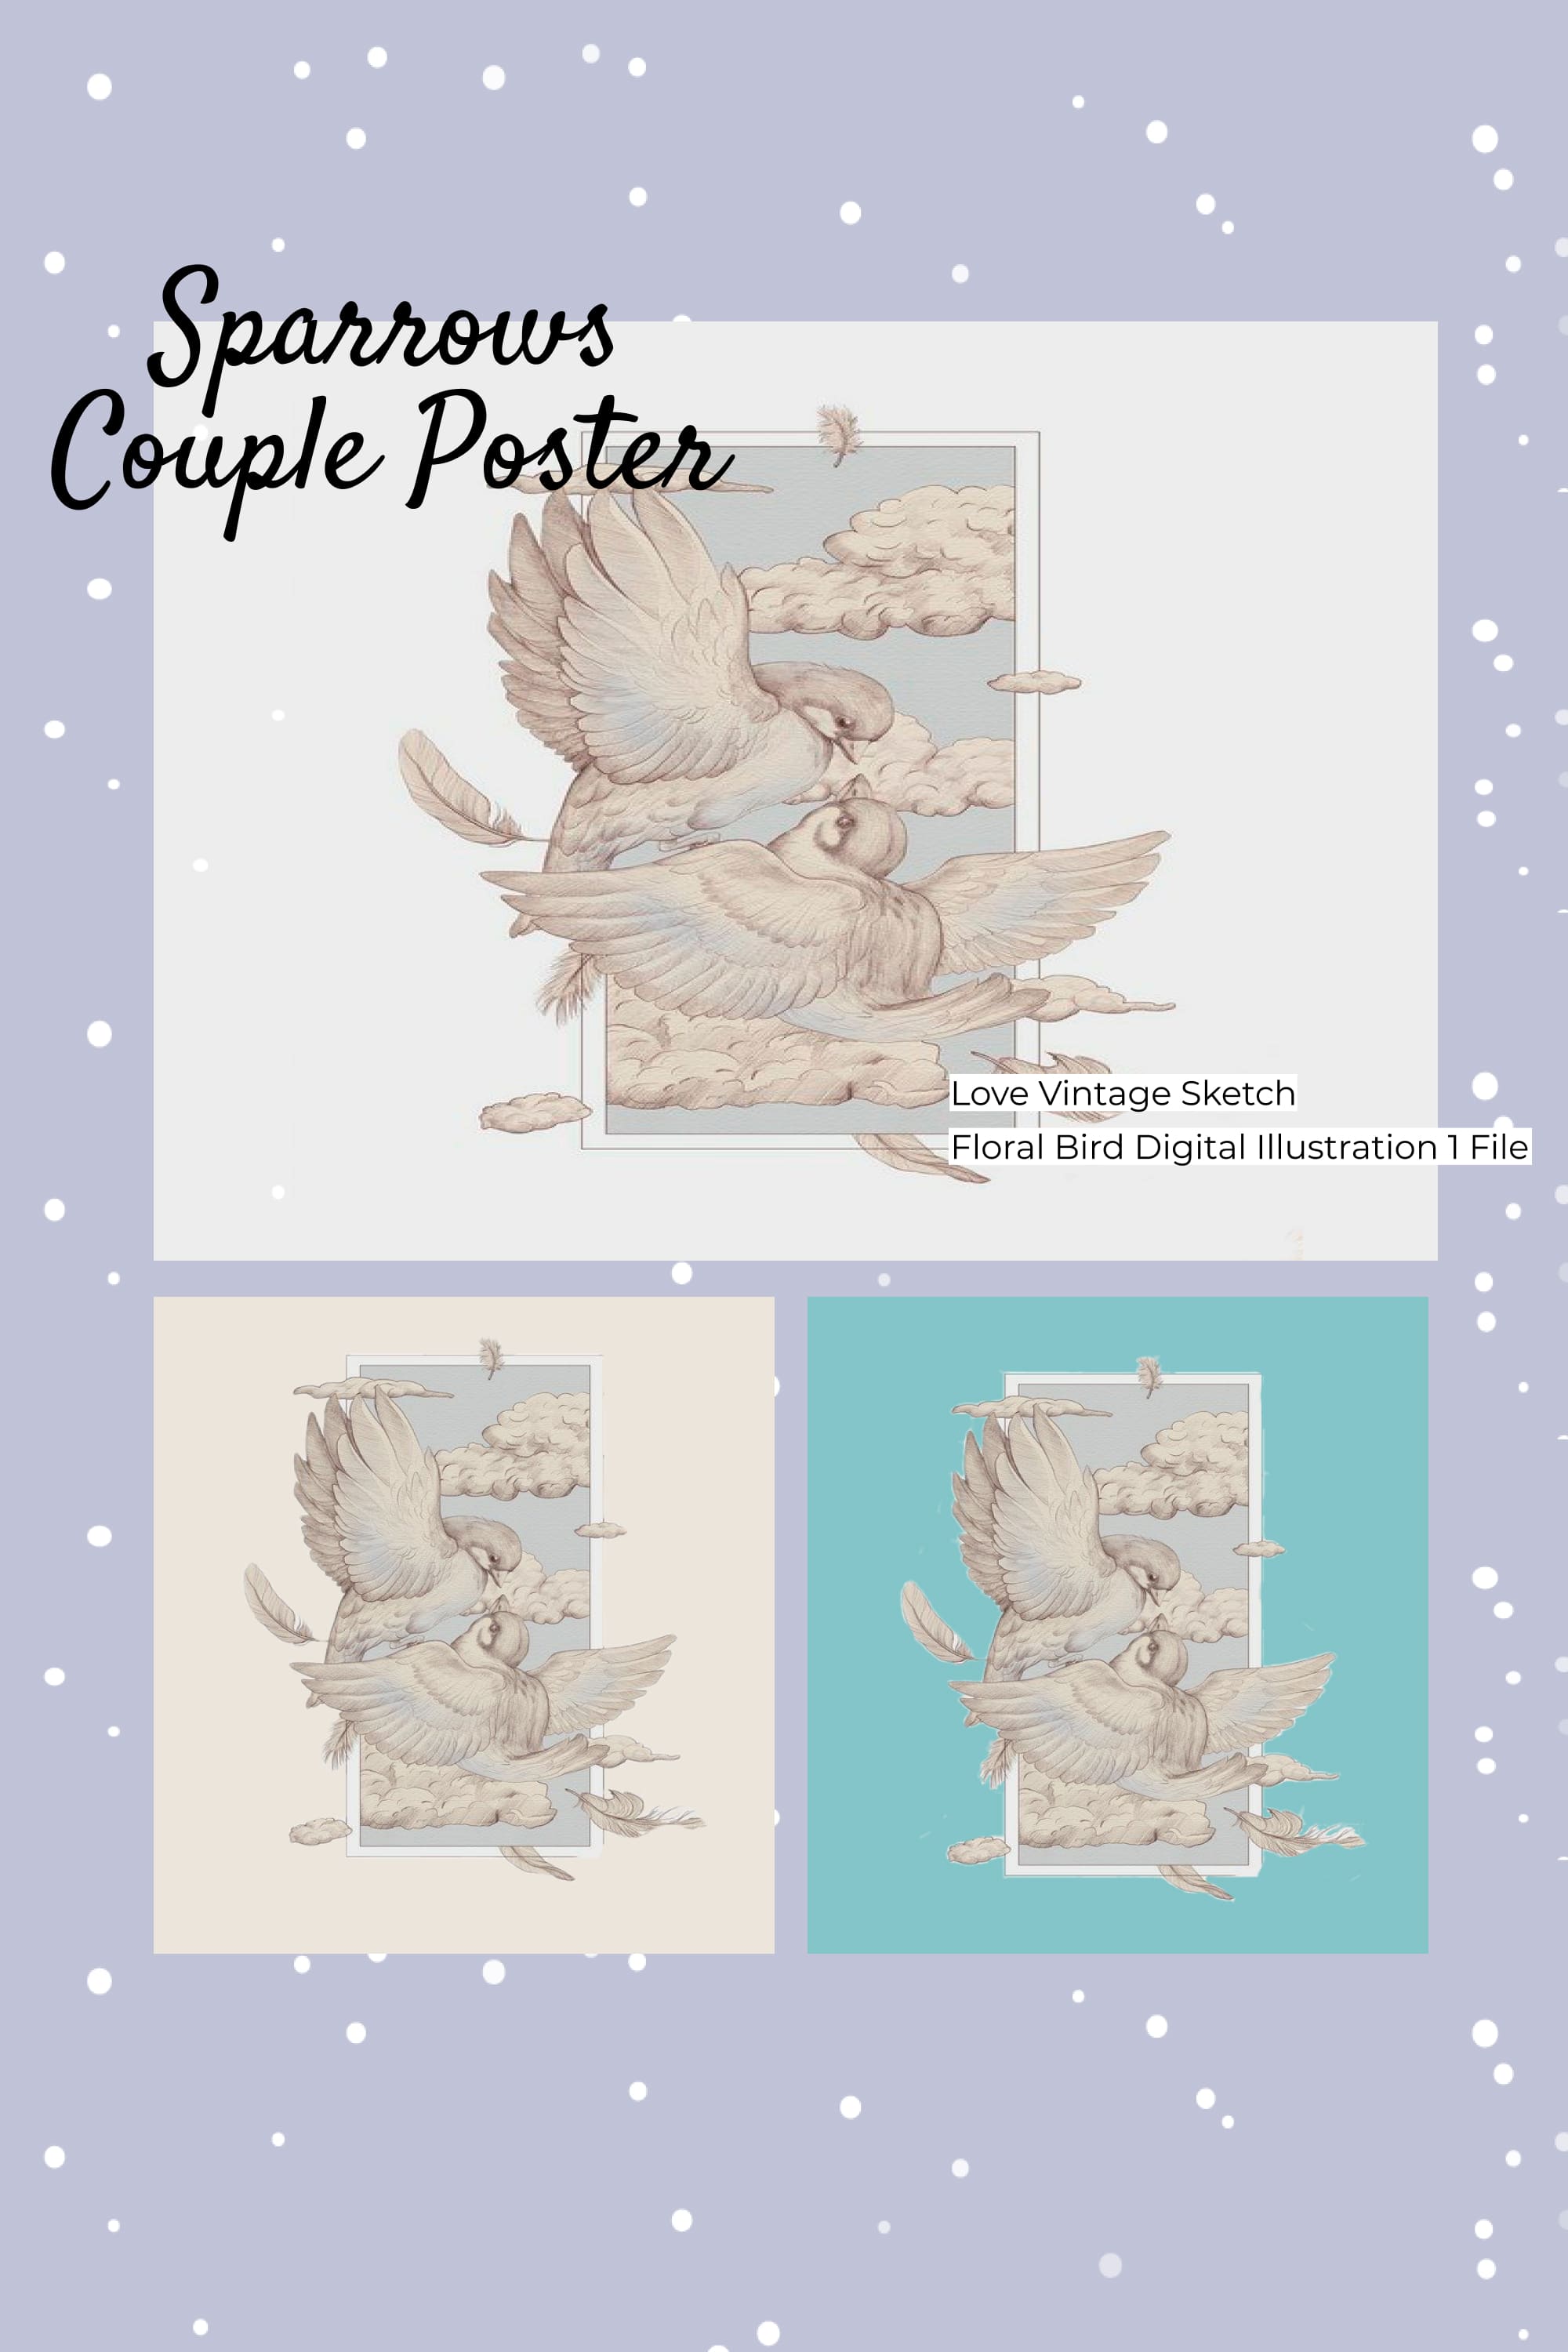 Sparrows couple poster - pinterest image preview.